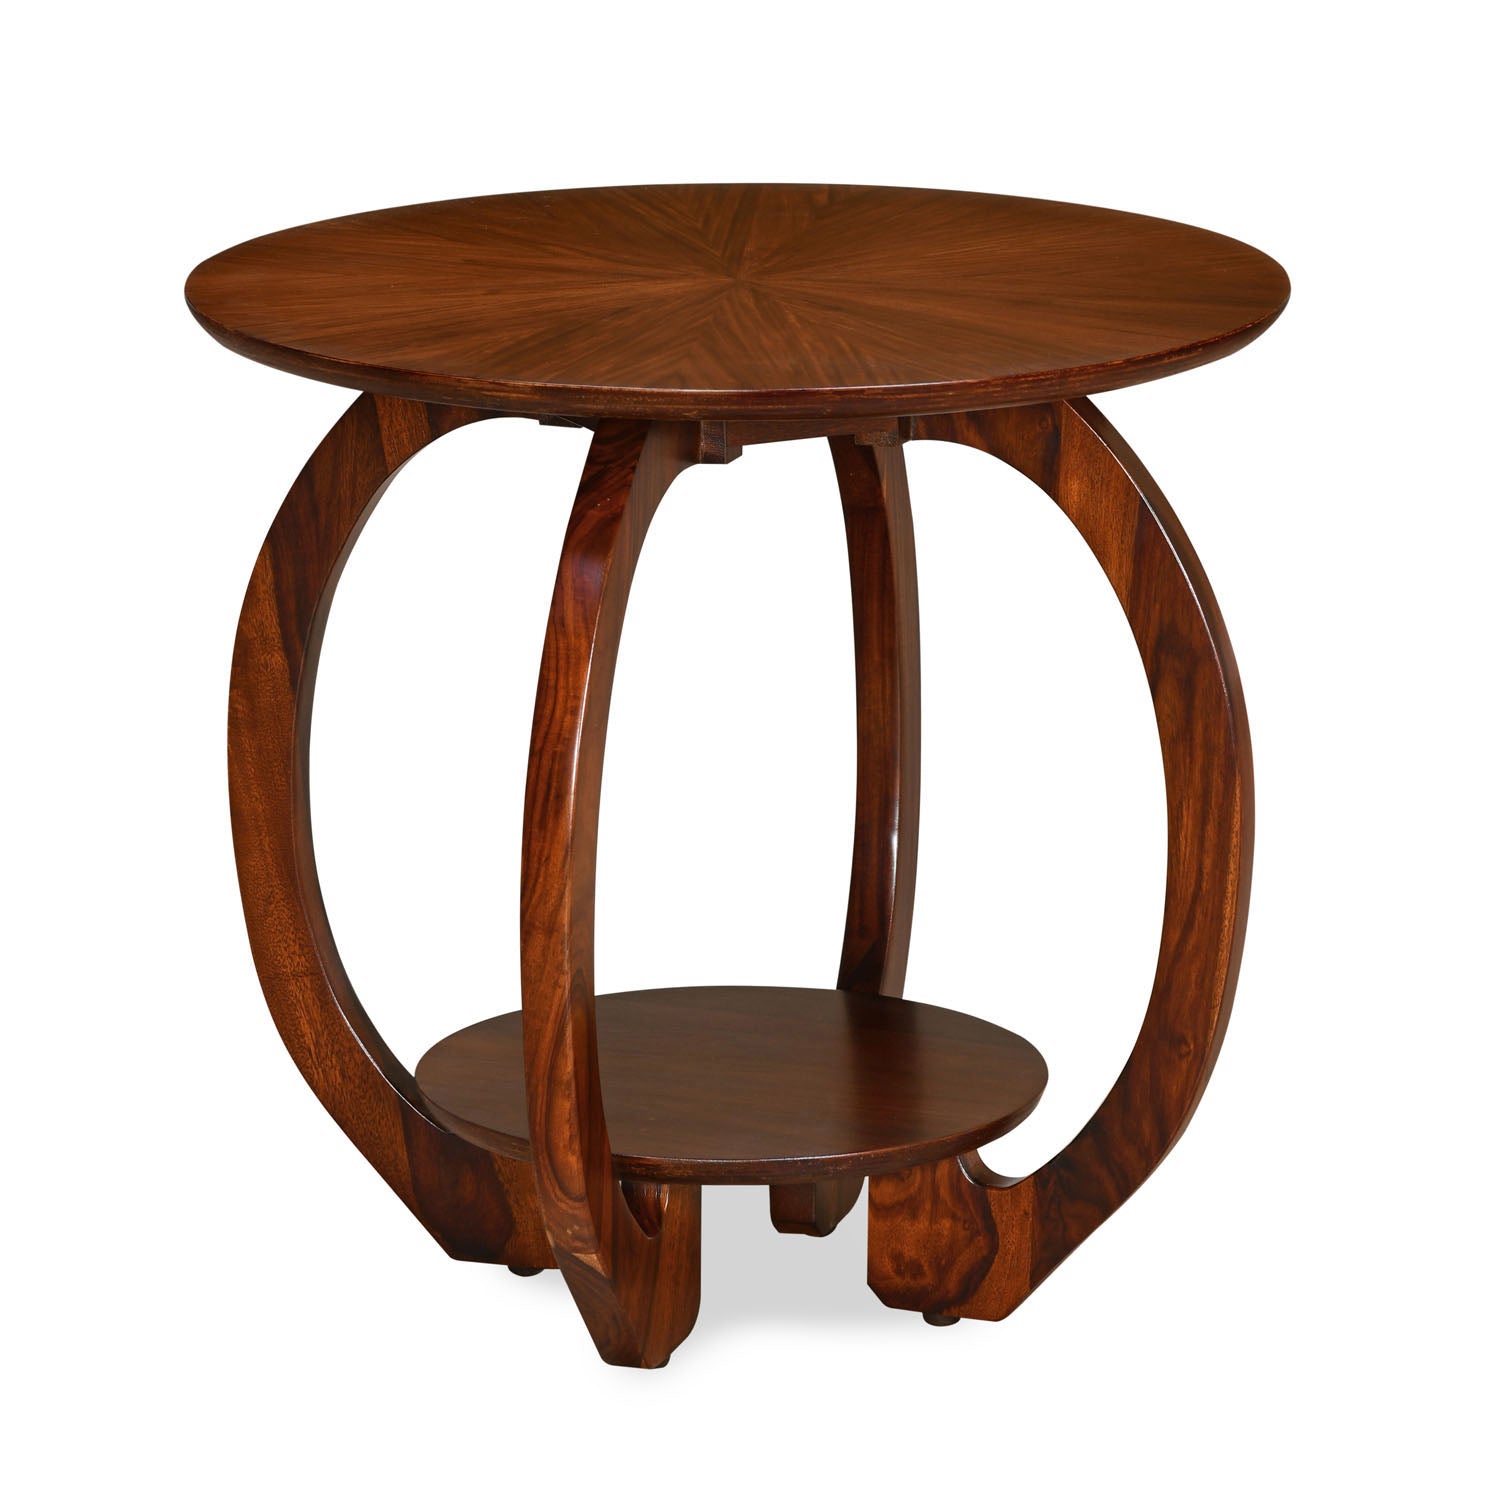 Peyton Solid Wood Round Side Table with Shelf Storage (Light Antique)